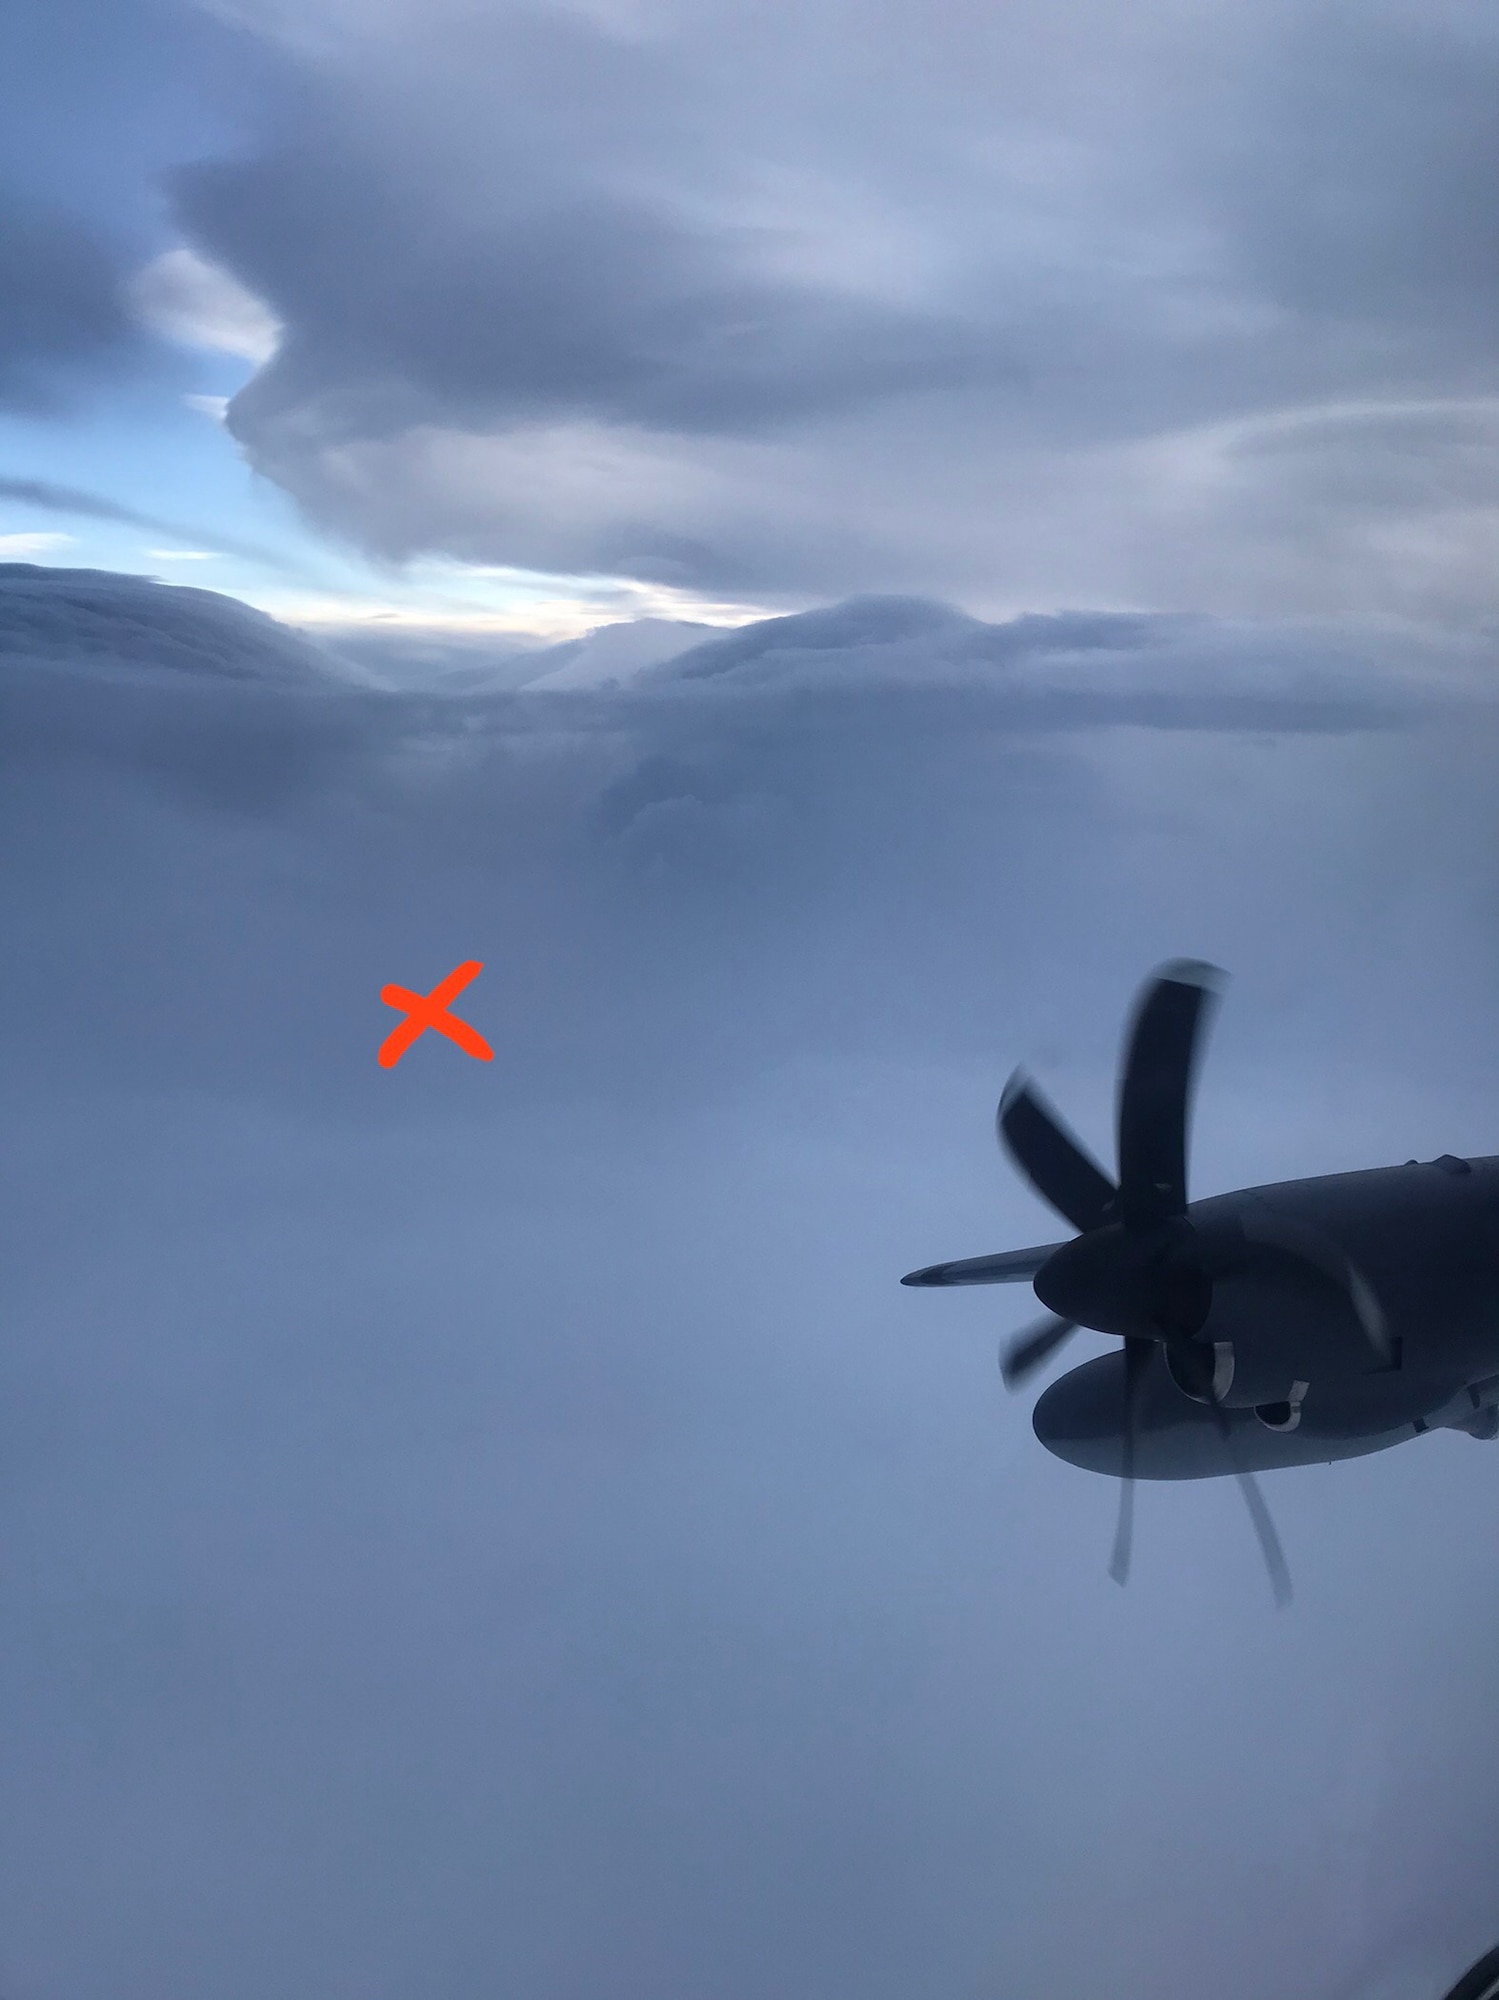 Pararescue personnel with the Alaska Air National Guard’s 176th Wing rescued a pilot and passenger May 31, 2021, two days after their airplane crashed near Mount Hawkins in Wrangell-St. Elias National Park and Preserve. The rescue was a collaboration by the Alaska Rescue Coordination Center, the  176th Wing and the National Park Service.